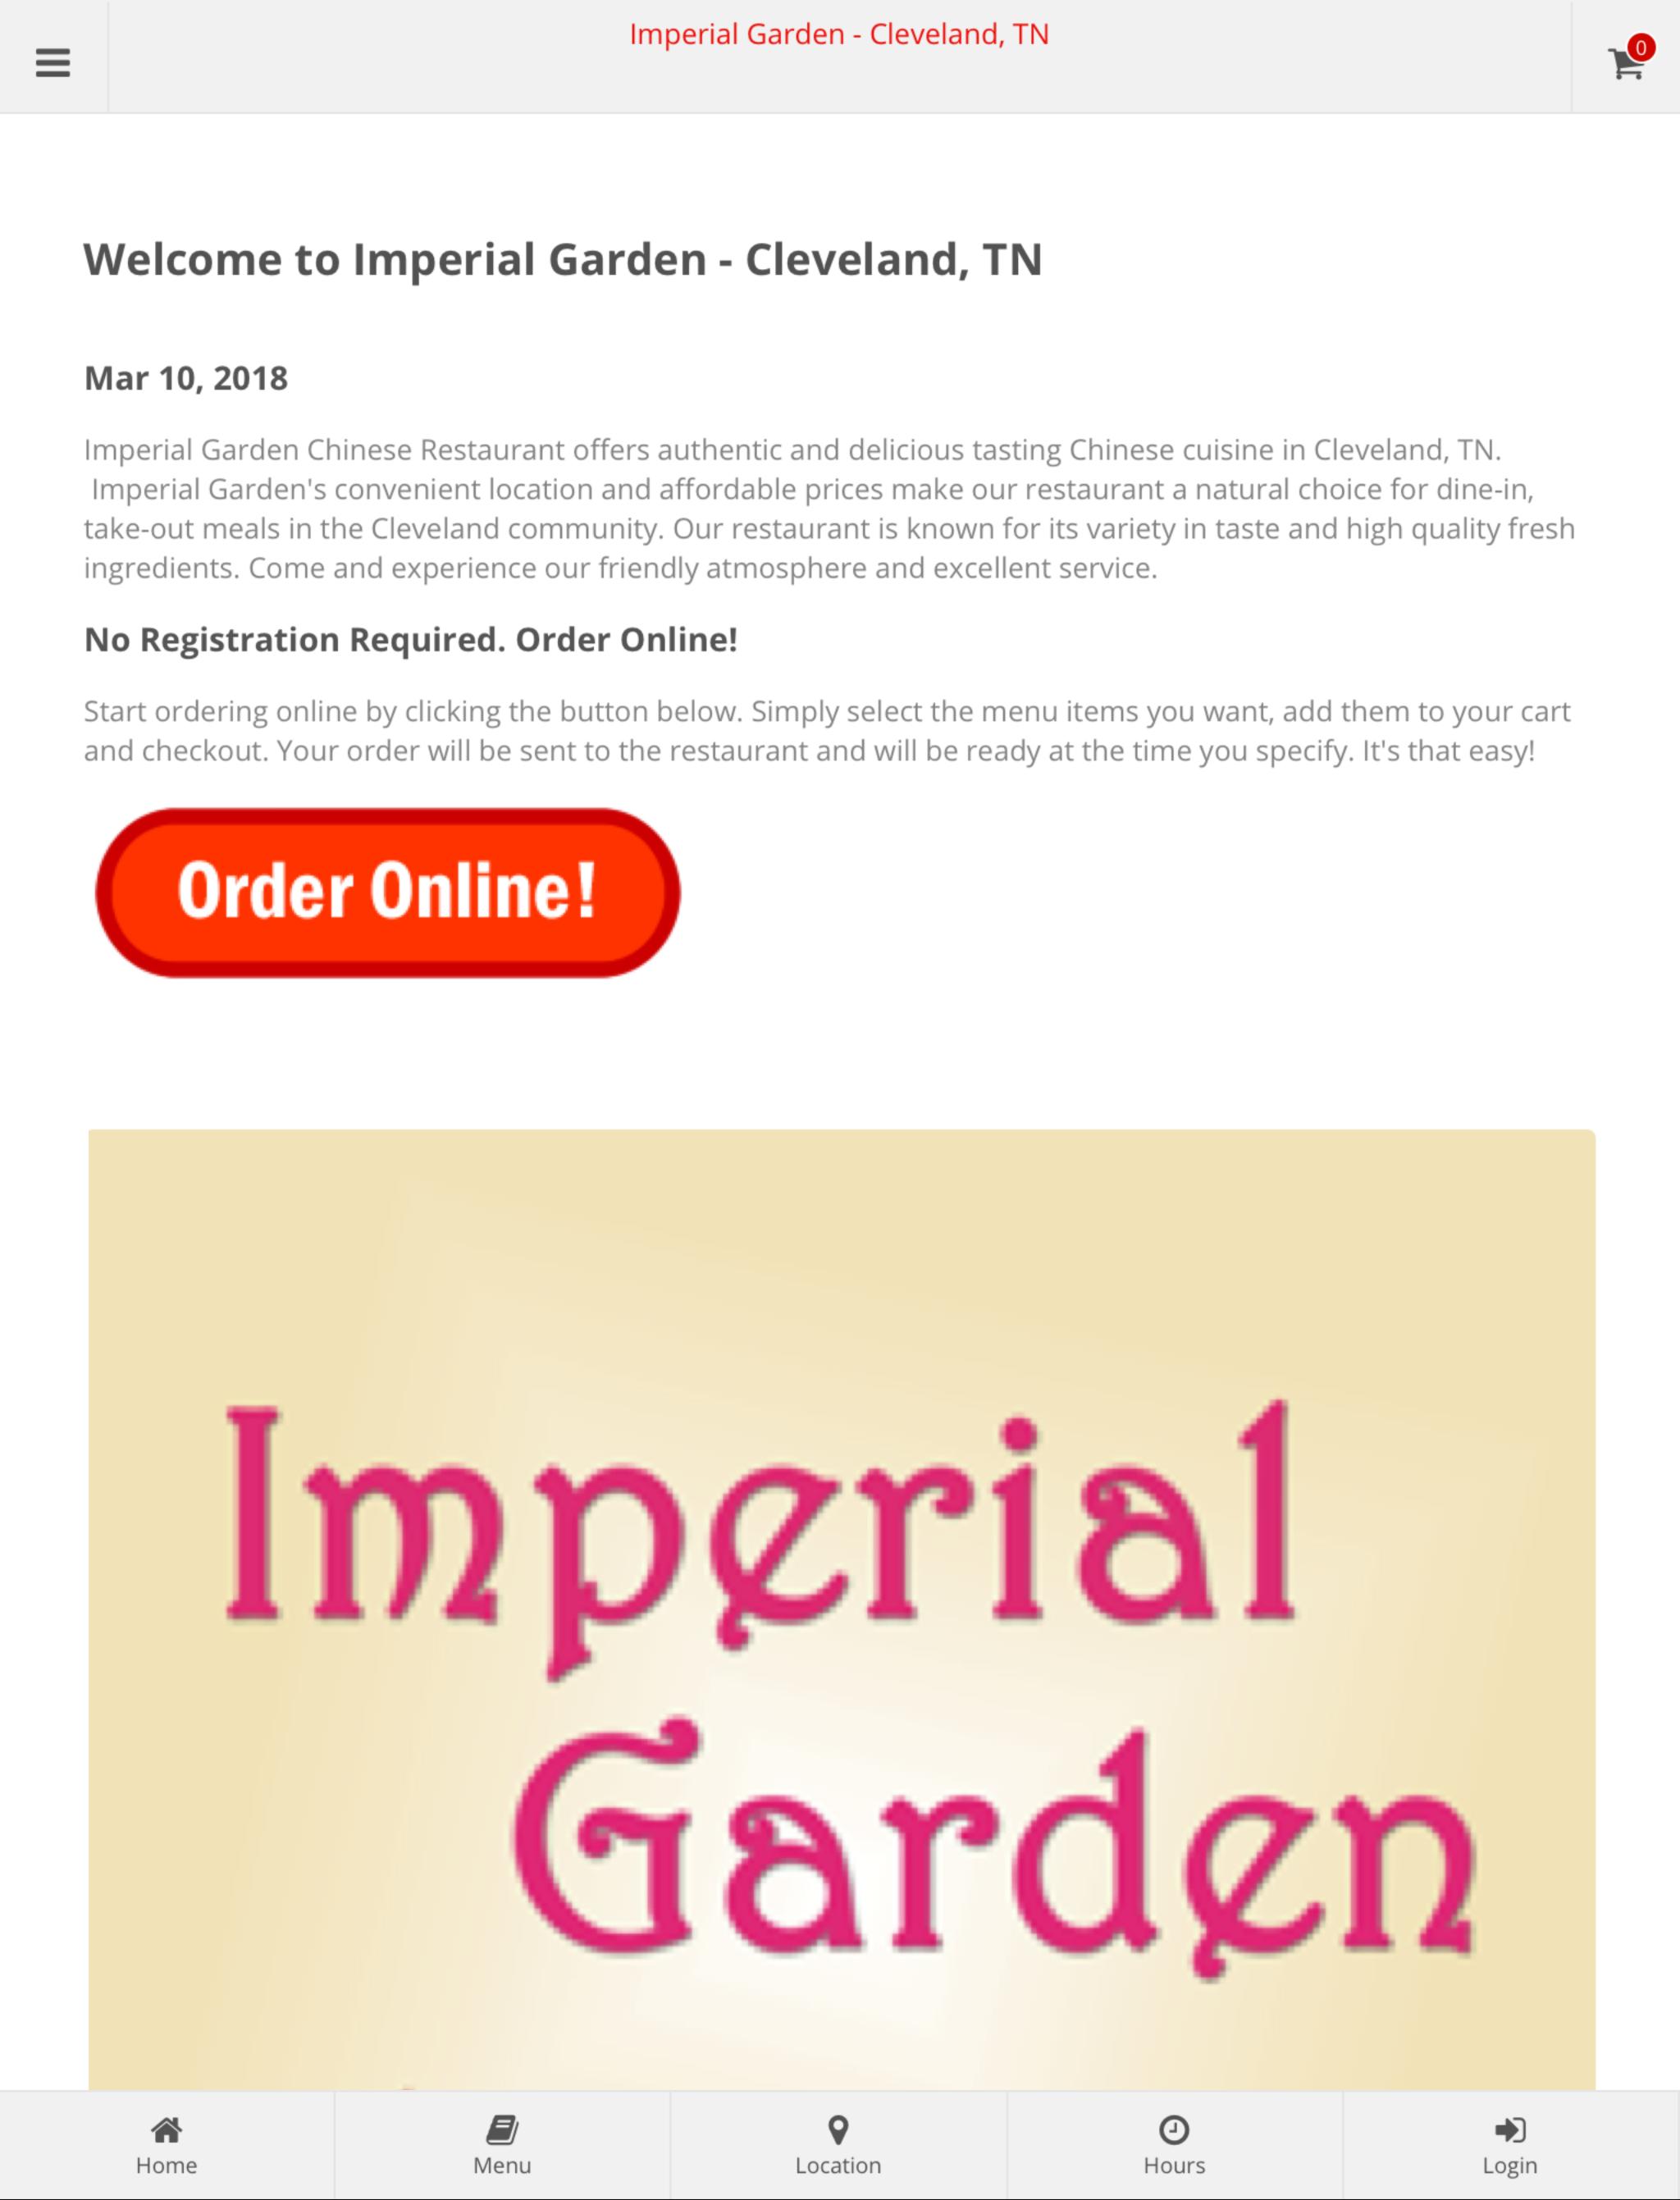 Imperial Garden Cleveland Tn Online Ordering For Android Apk